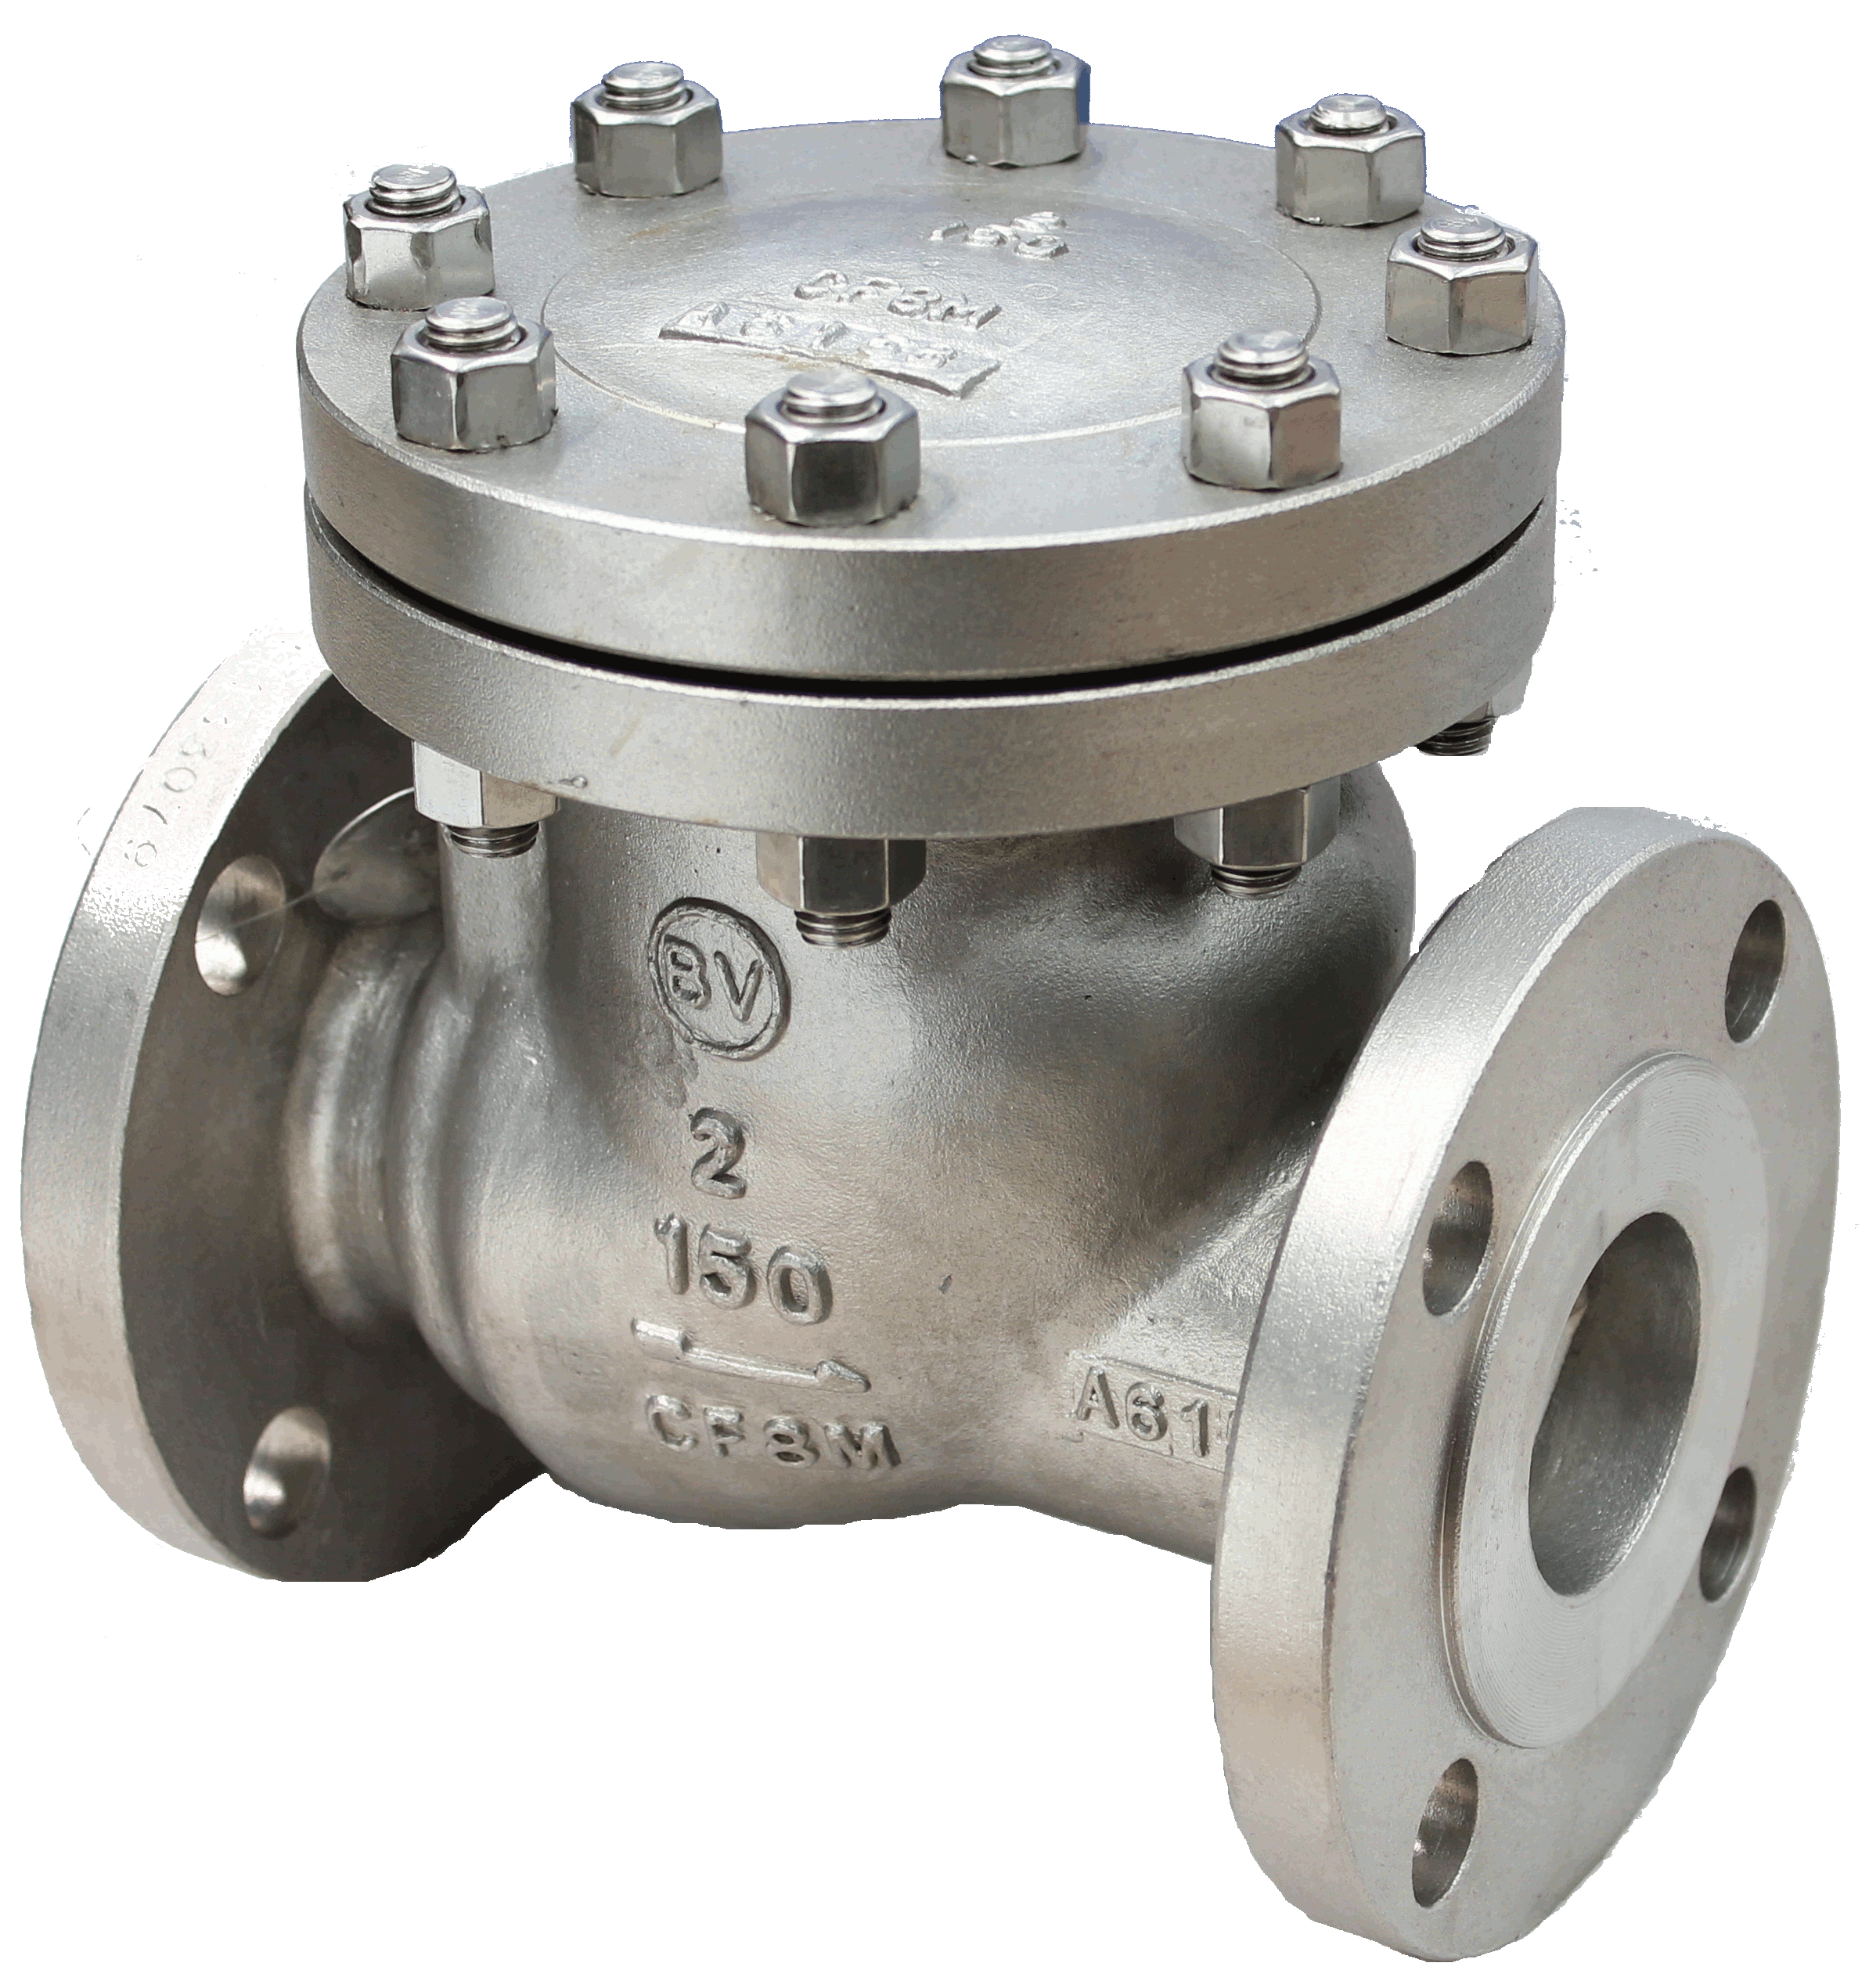 STAINLESS STEEL SWING CHECK VALVE FLANGED CLASS 150 with HF SEATS